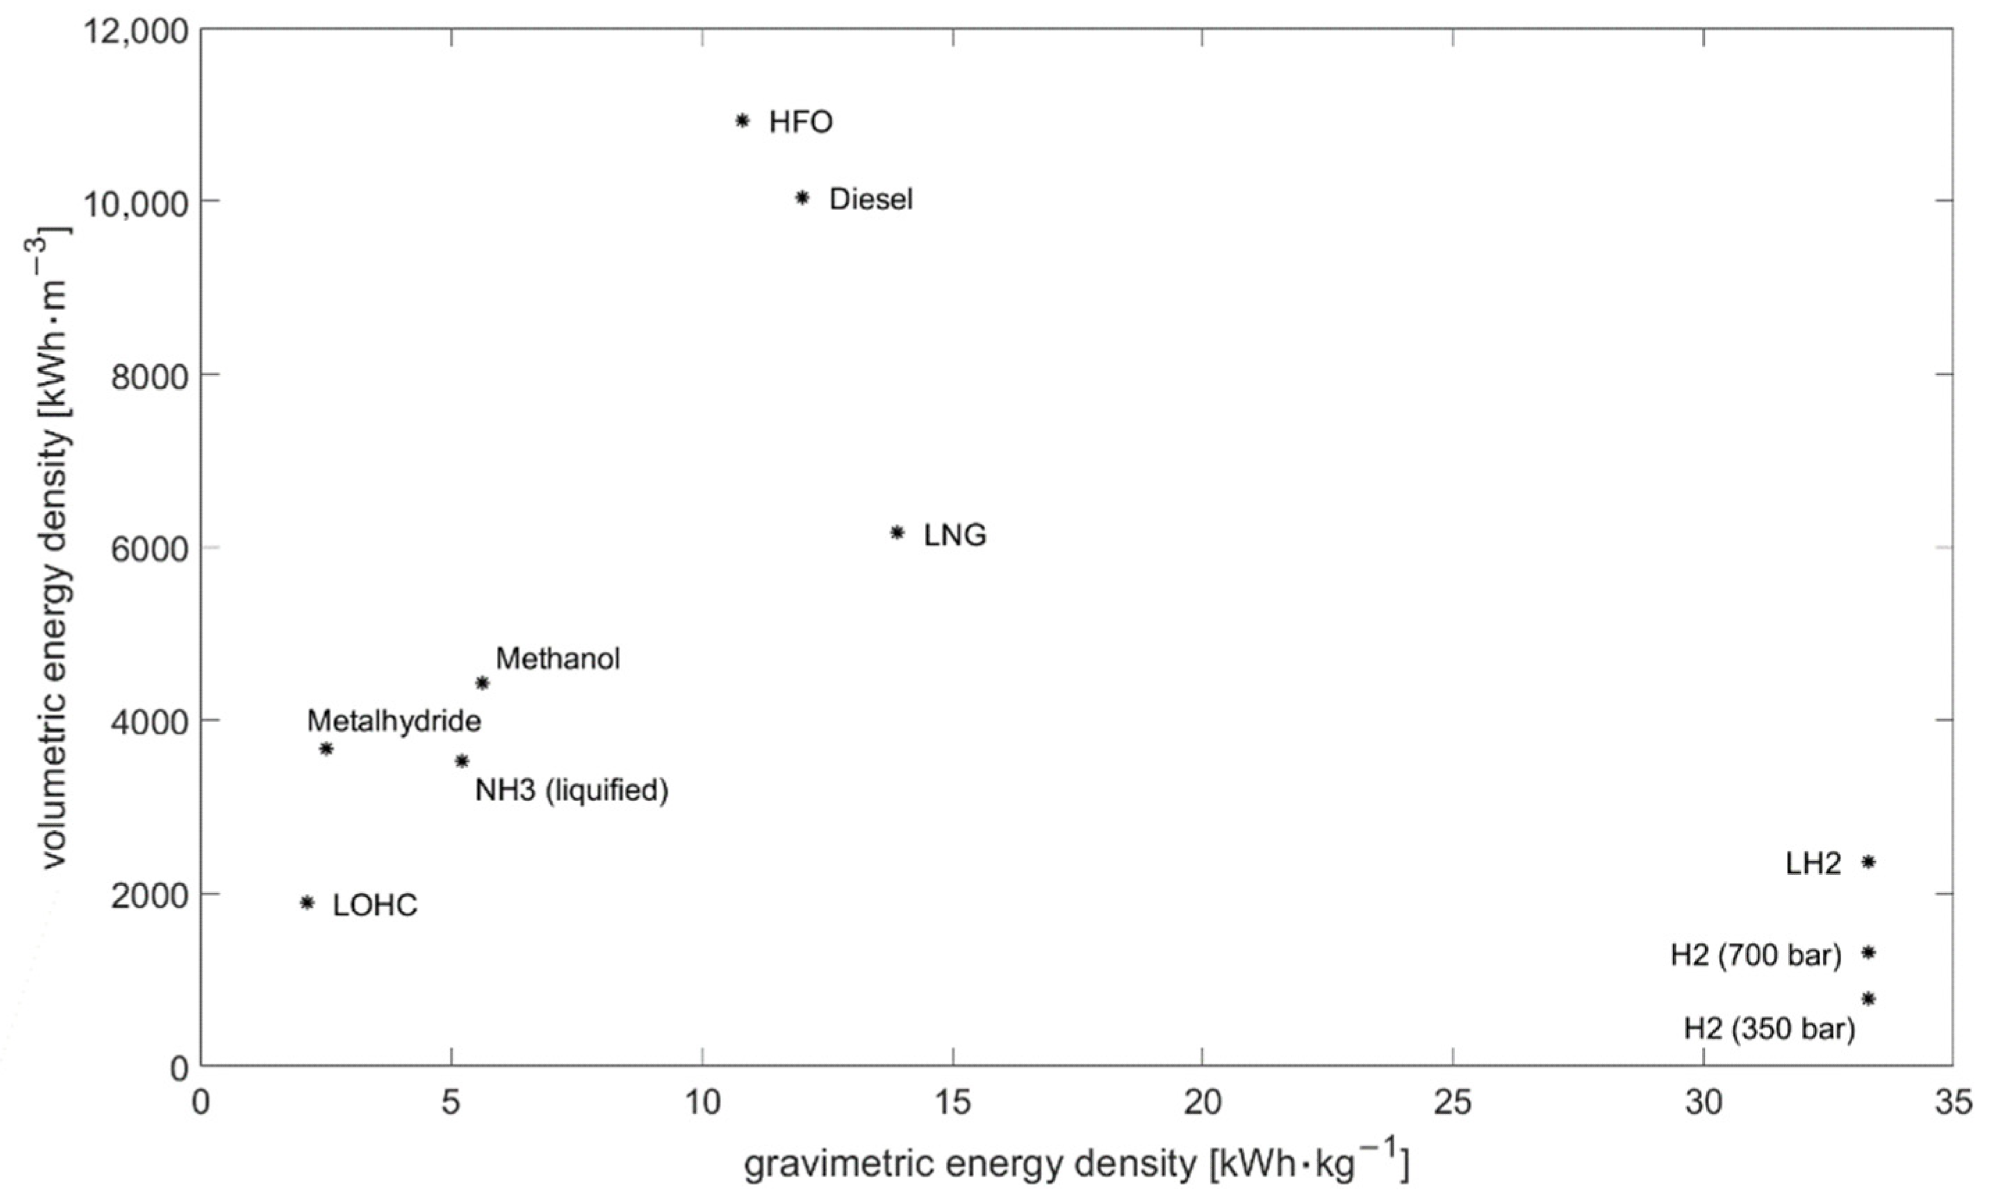 Energy density of different energy carriers.